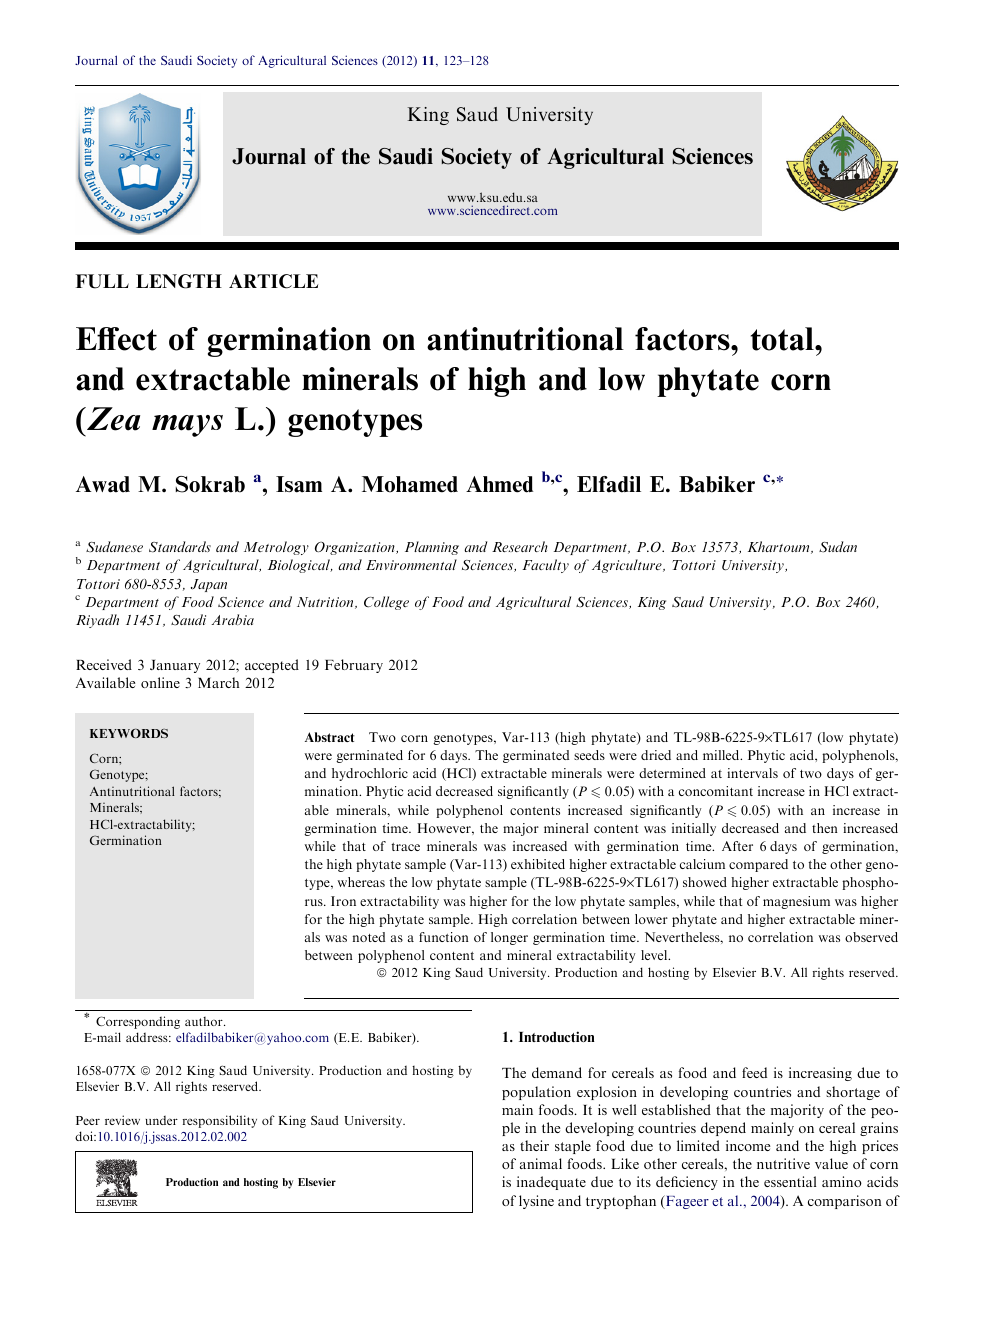 Effect Of Germination On Antinutritional Factors Total And Extractable Minerals Of High And Low Phytate Corn Zea Mays L Genotypes Topic Of Research Paper In Biological Sciences Download Scholarly Article Pdf